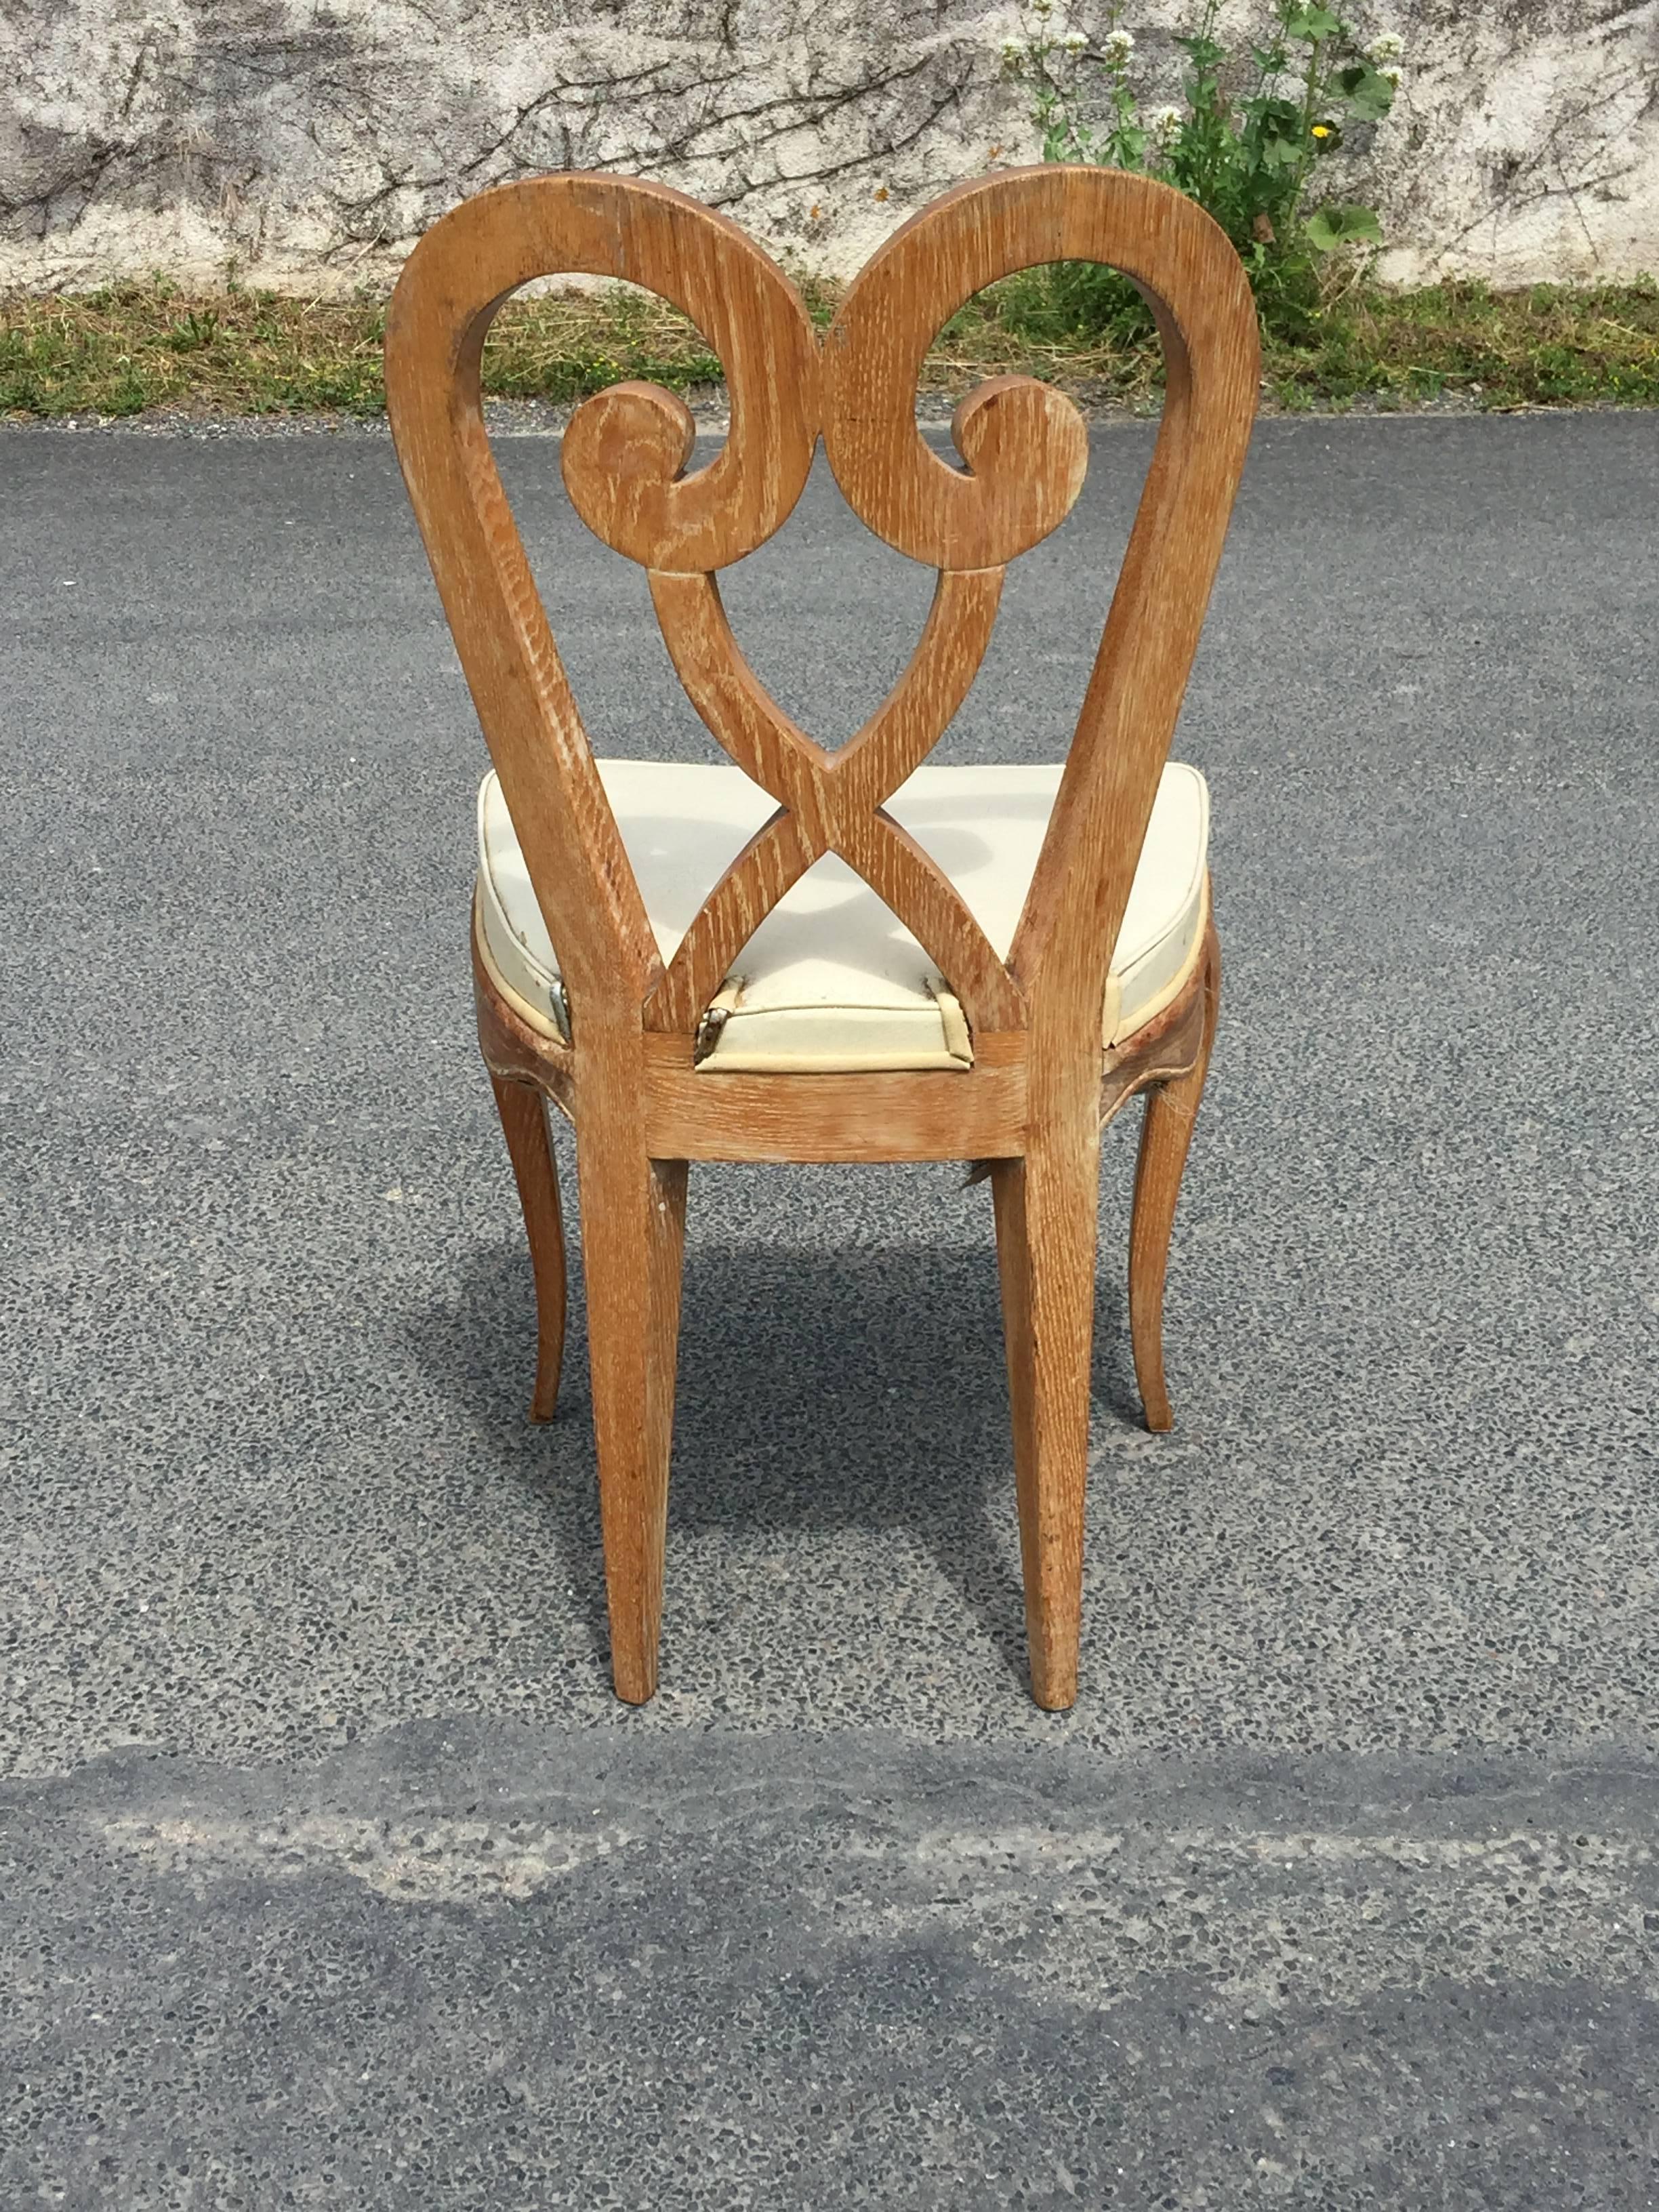 Germaine Darbois-Gaudin, Set of Six Art Deco Chairs, circa 1940 For Sale 3